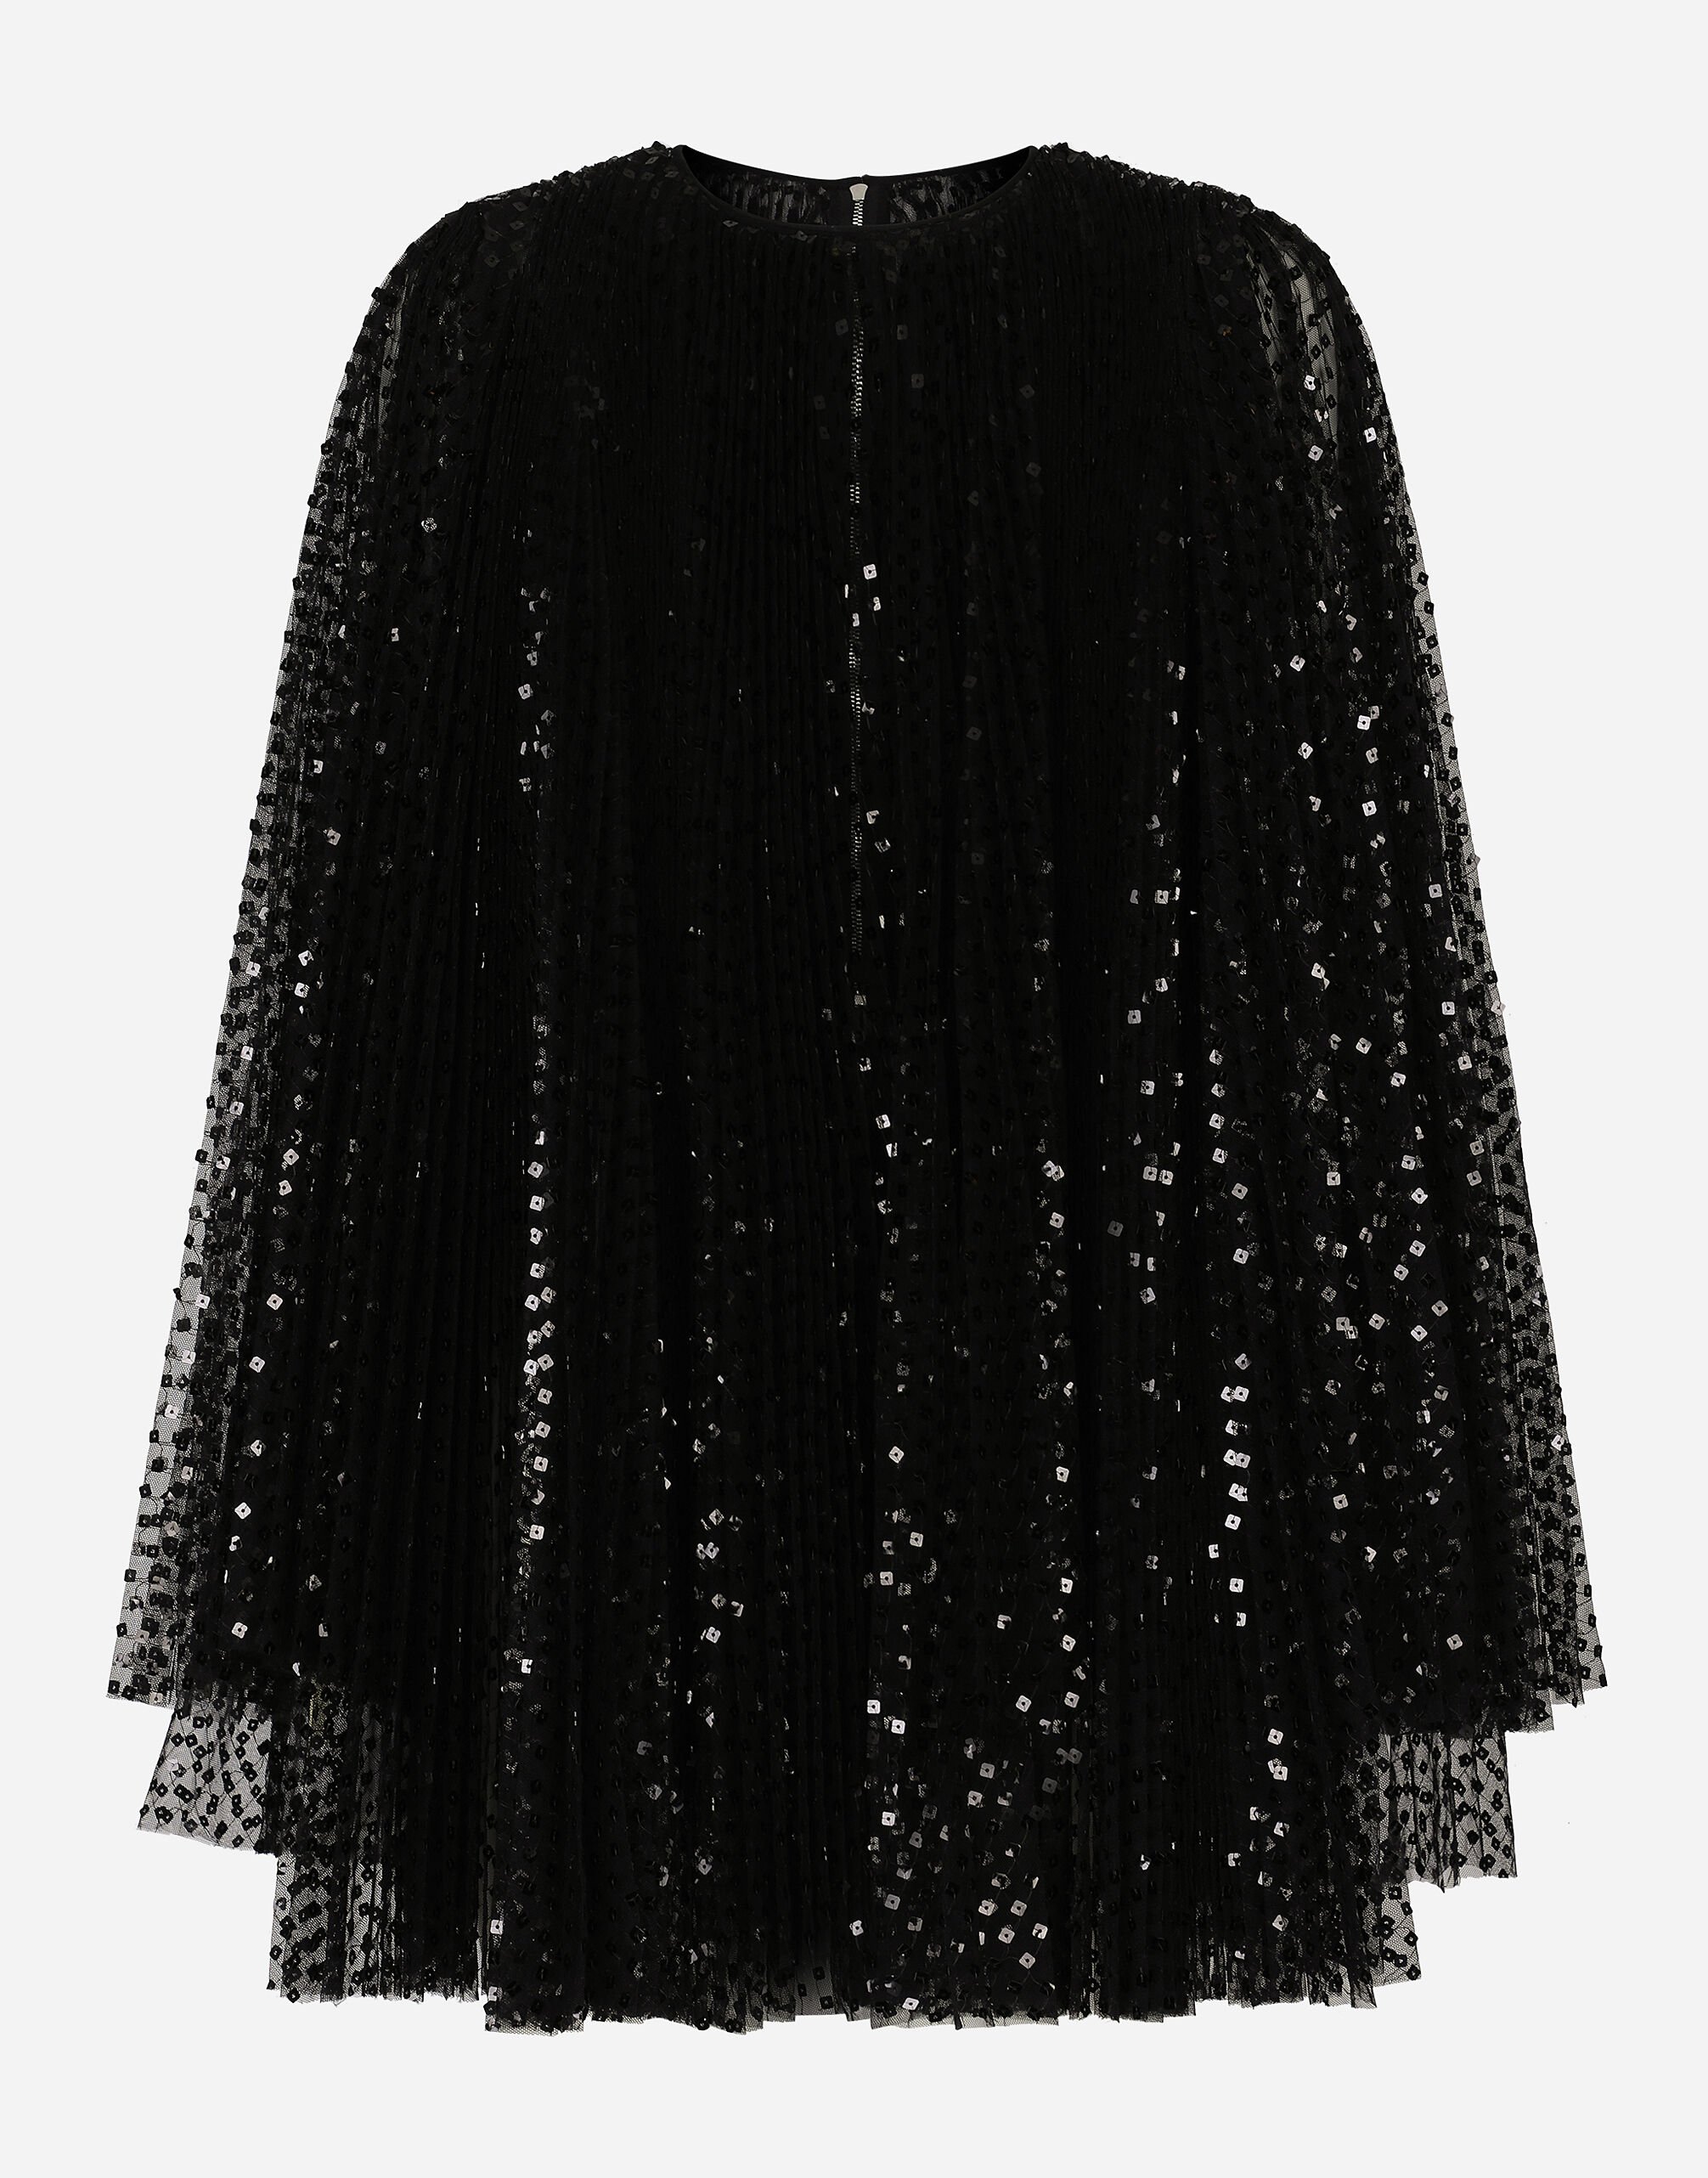 Dolce & Gabbana Short pleated dress with full sequined sleeves Black F6DFDTFLSIO